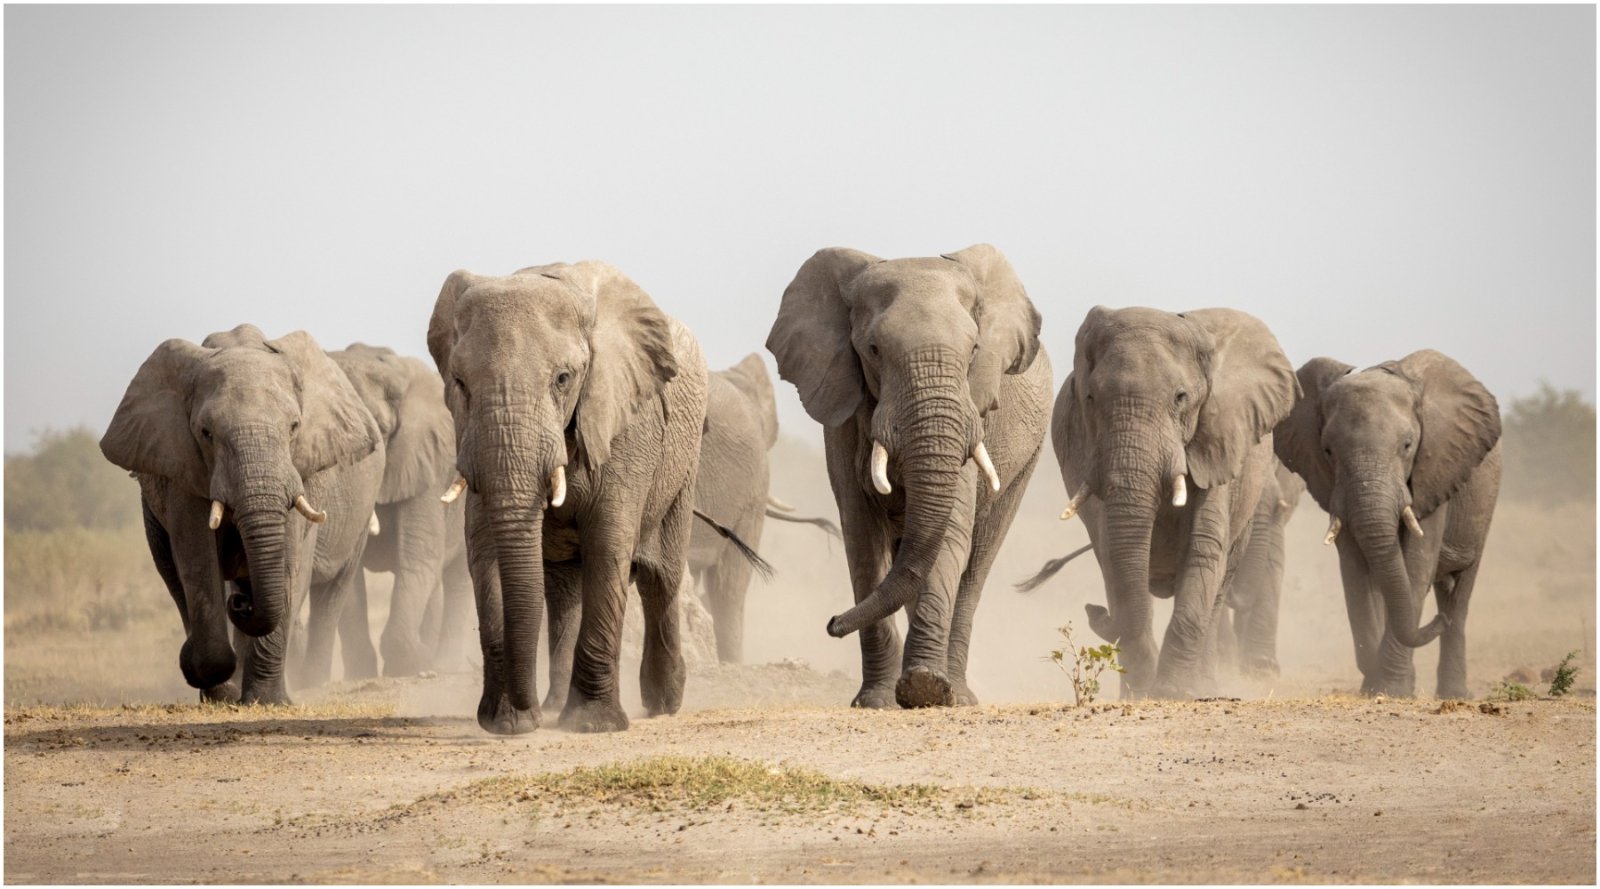 Scientists want to release elephants into Europe to save our ecosystem: is that a good idea?